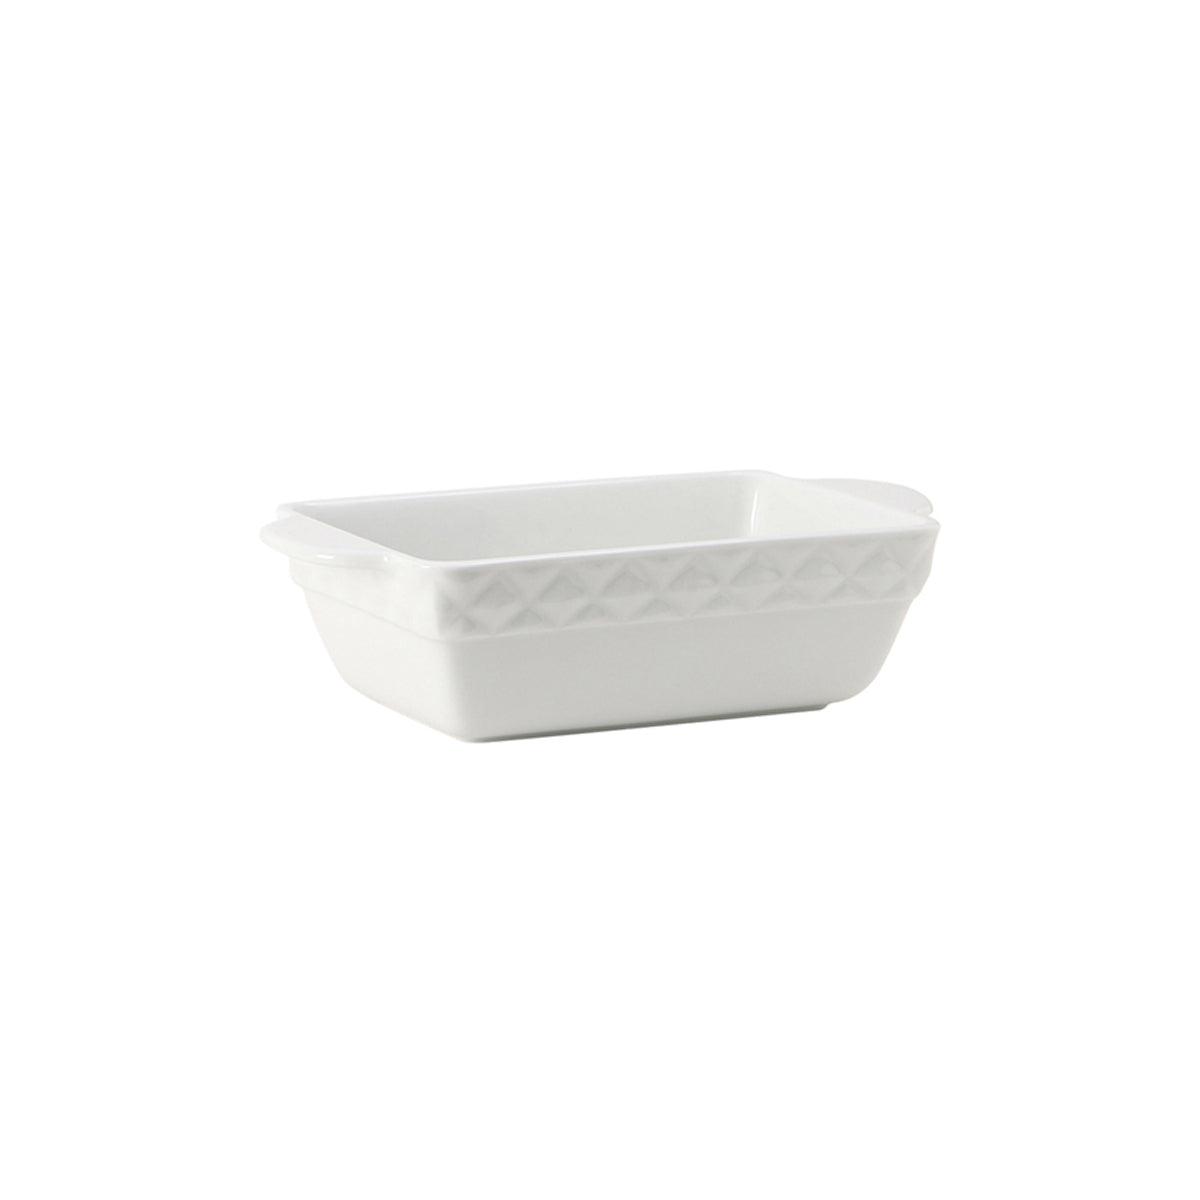 Duratux Loaf Pan by Tuxton Home - Vysn